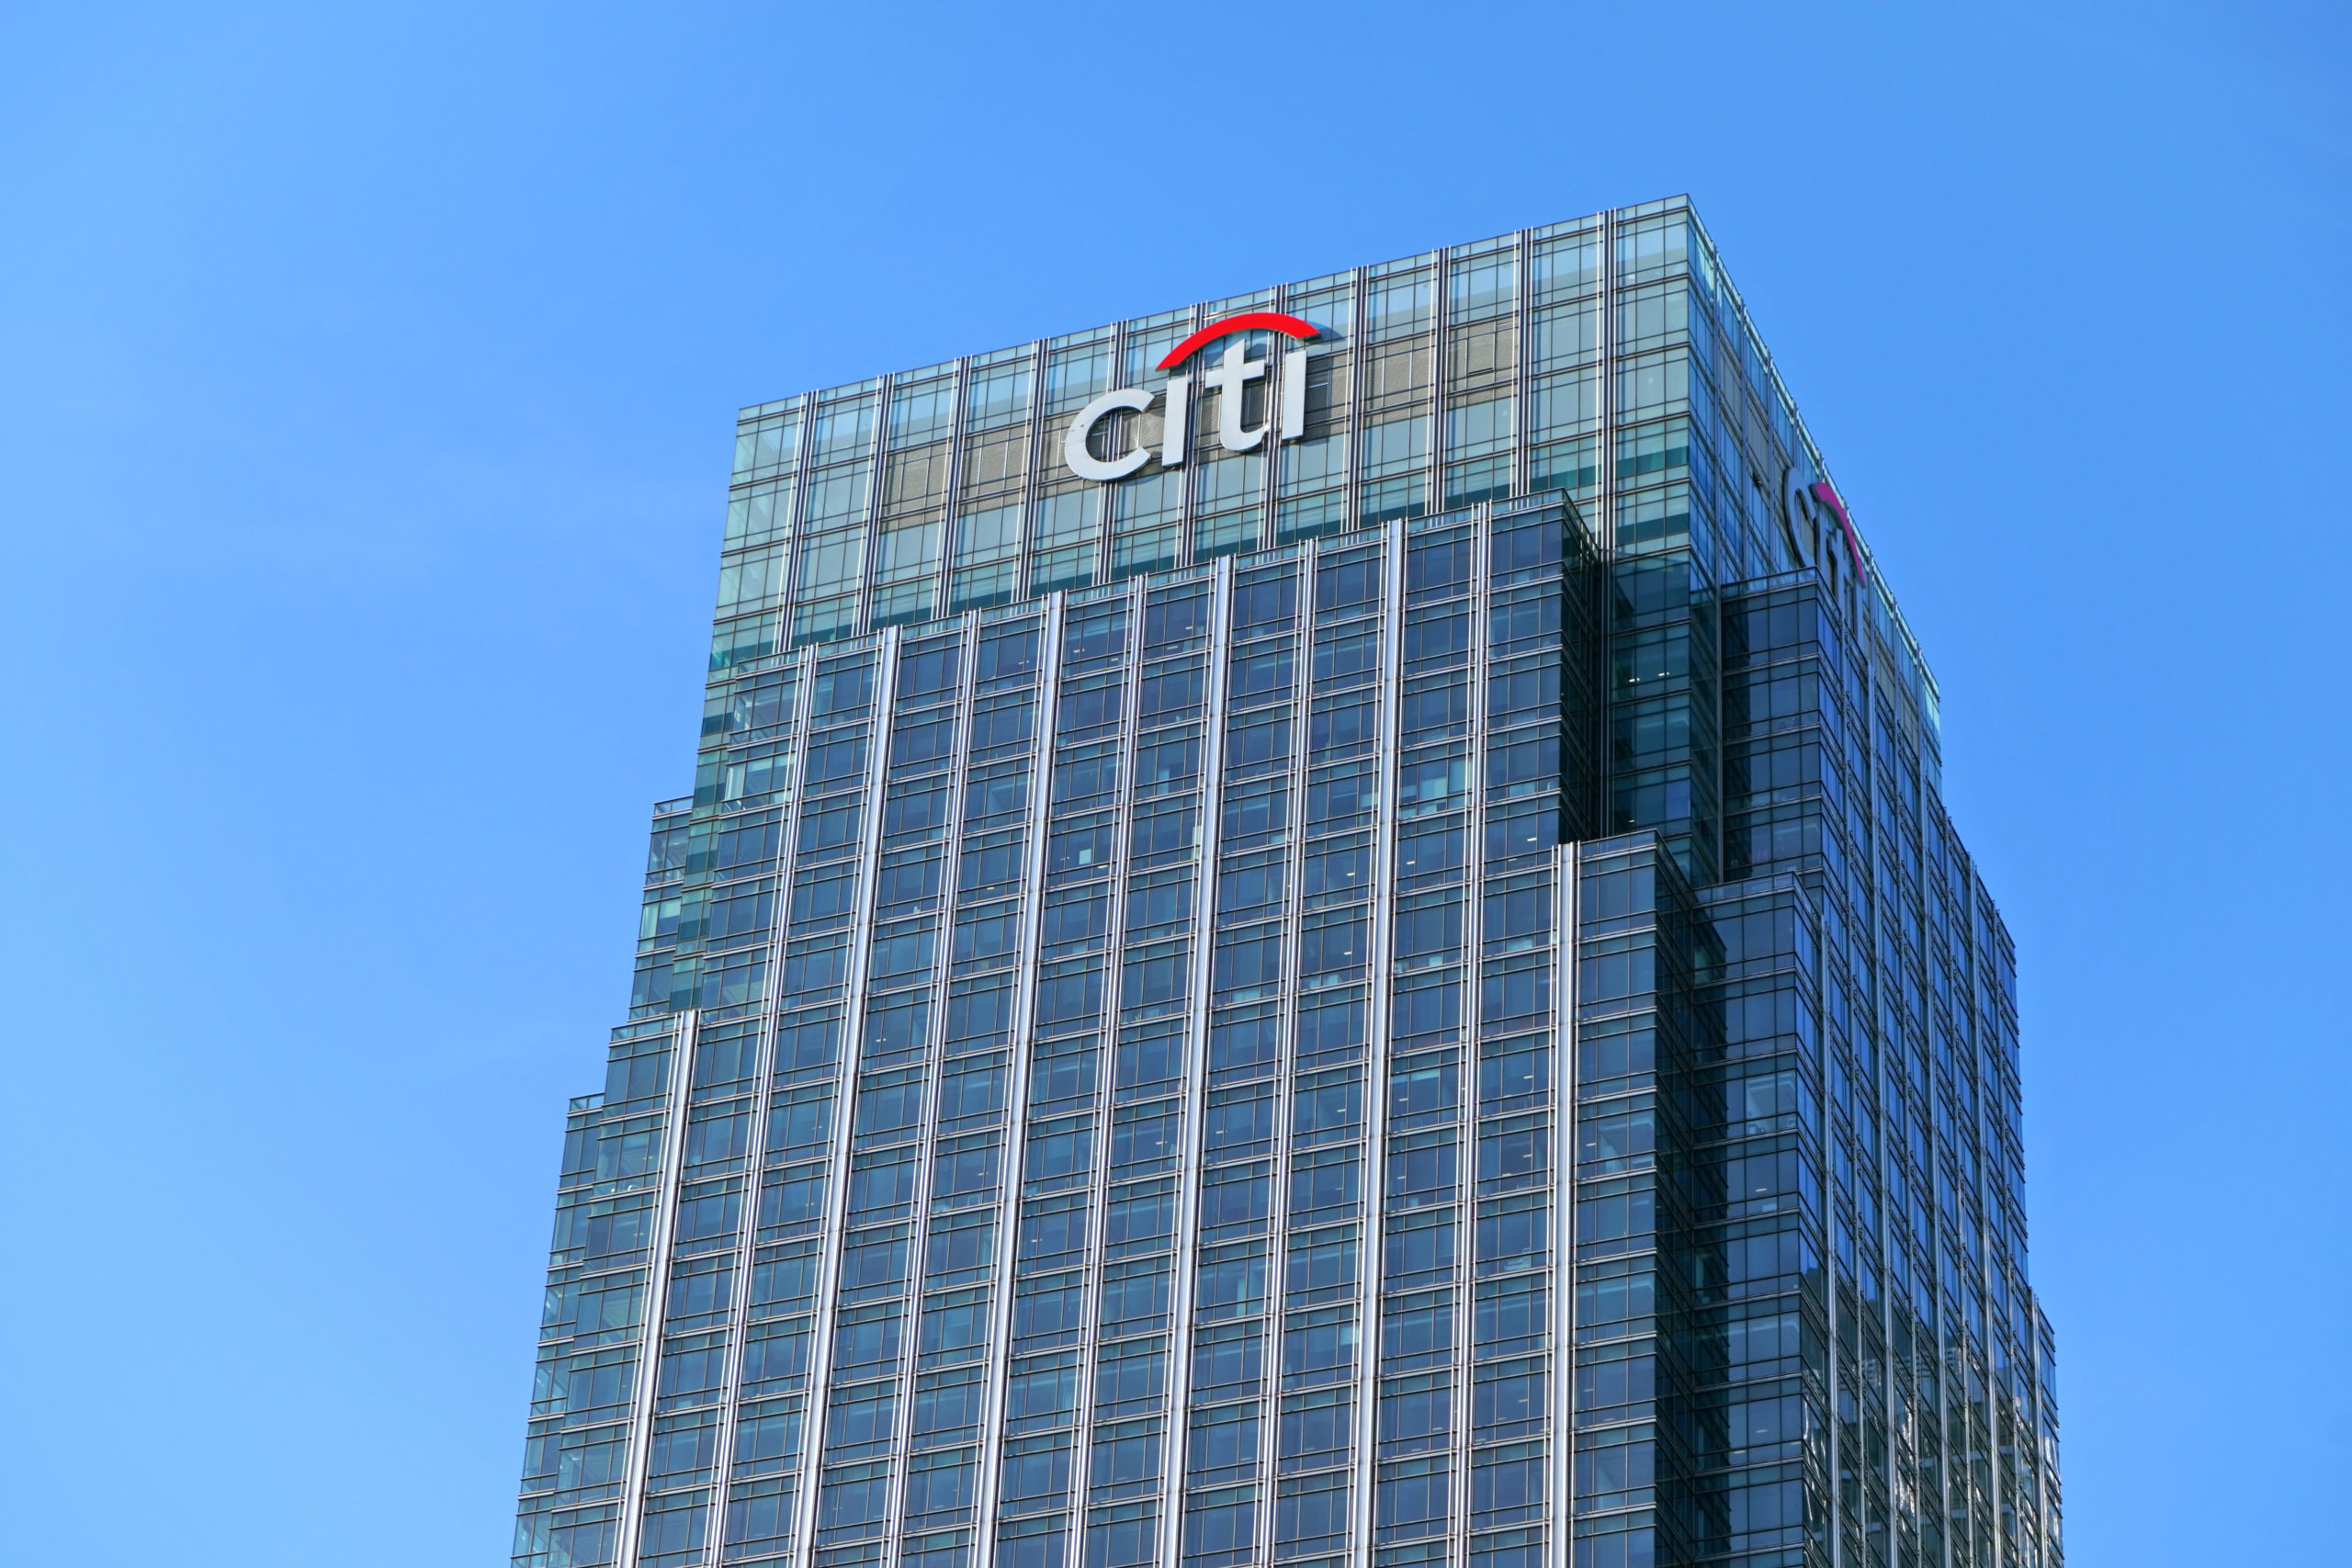 London, United Kingdom - February 03, 2019: Citi EMEA headquarters building at Canary Wharf. Citibank (Citigroup Inc.) is American investment bank founded 1988.